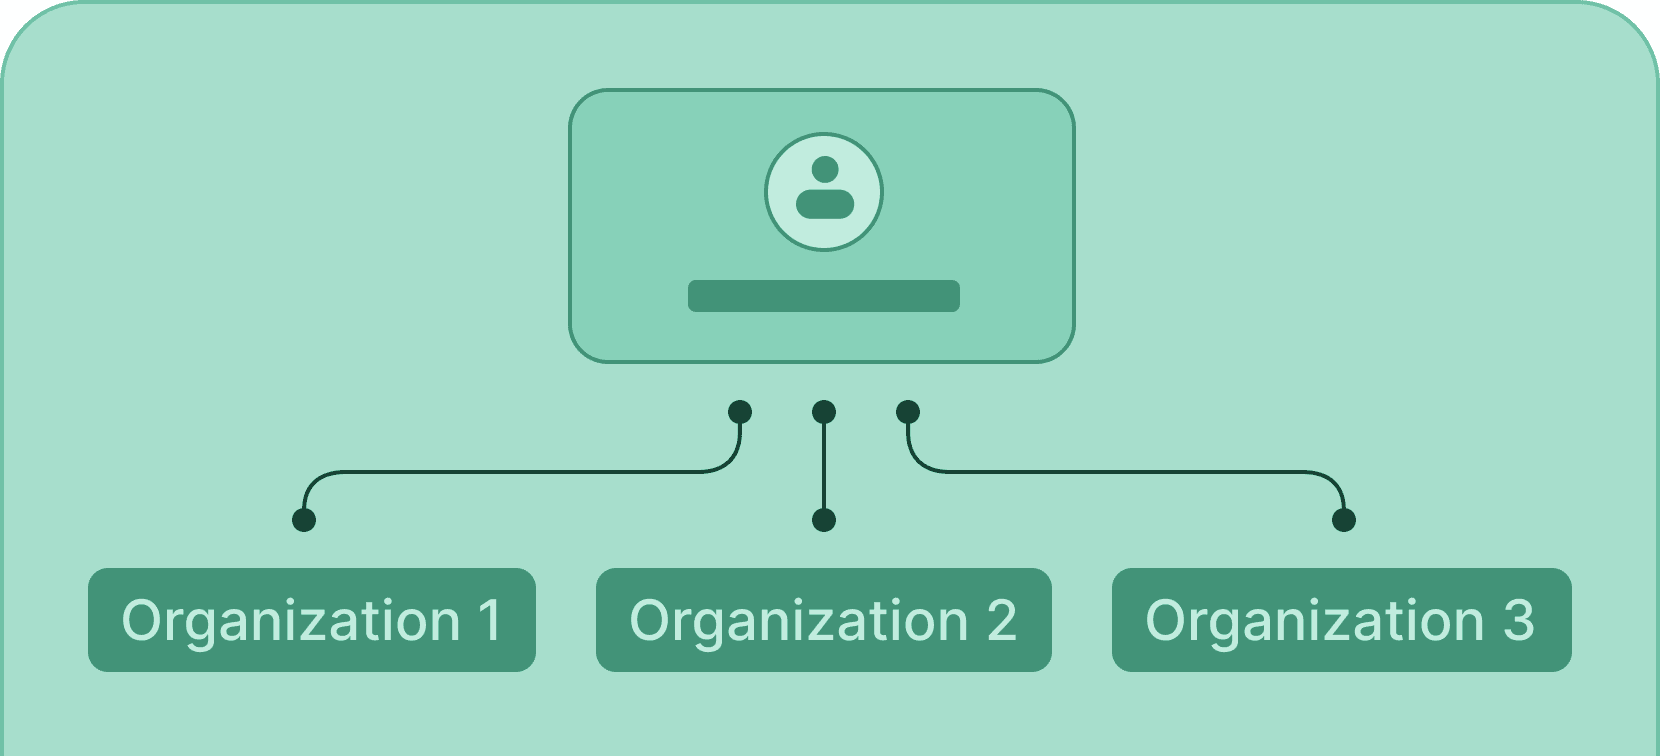 Manage multiple organizations - Certifier features